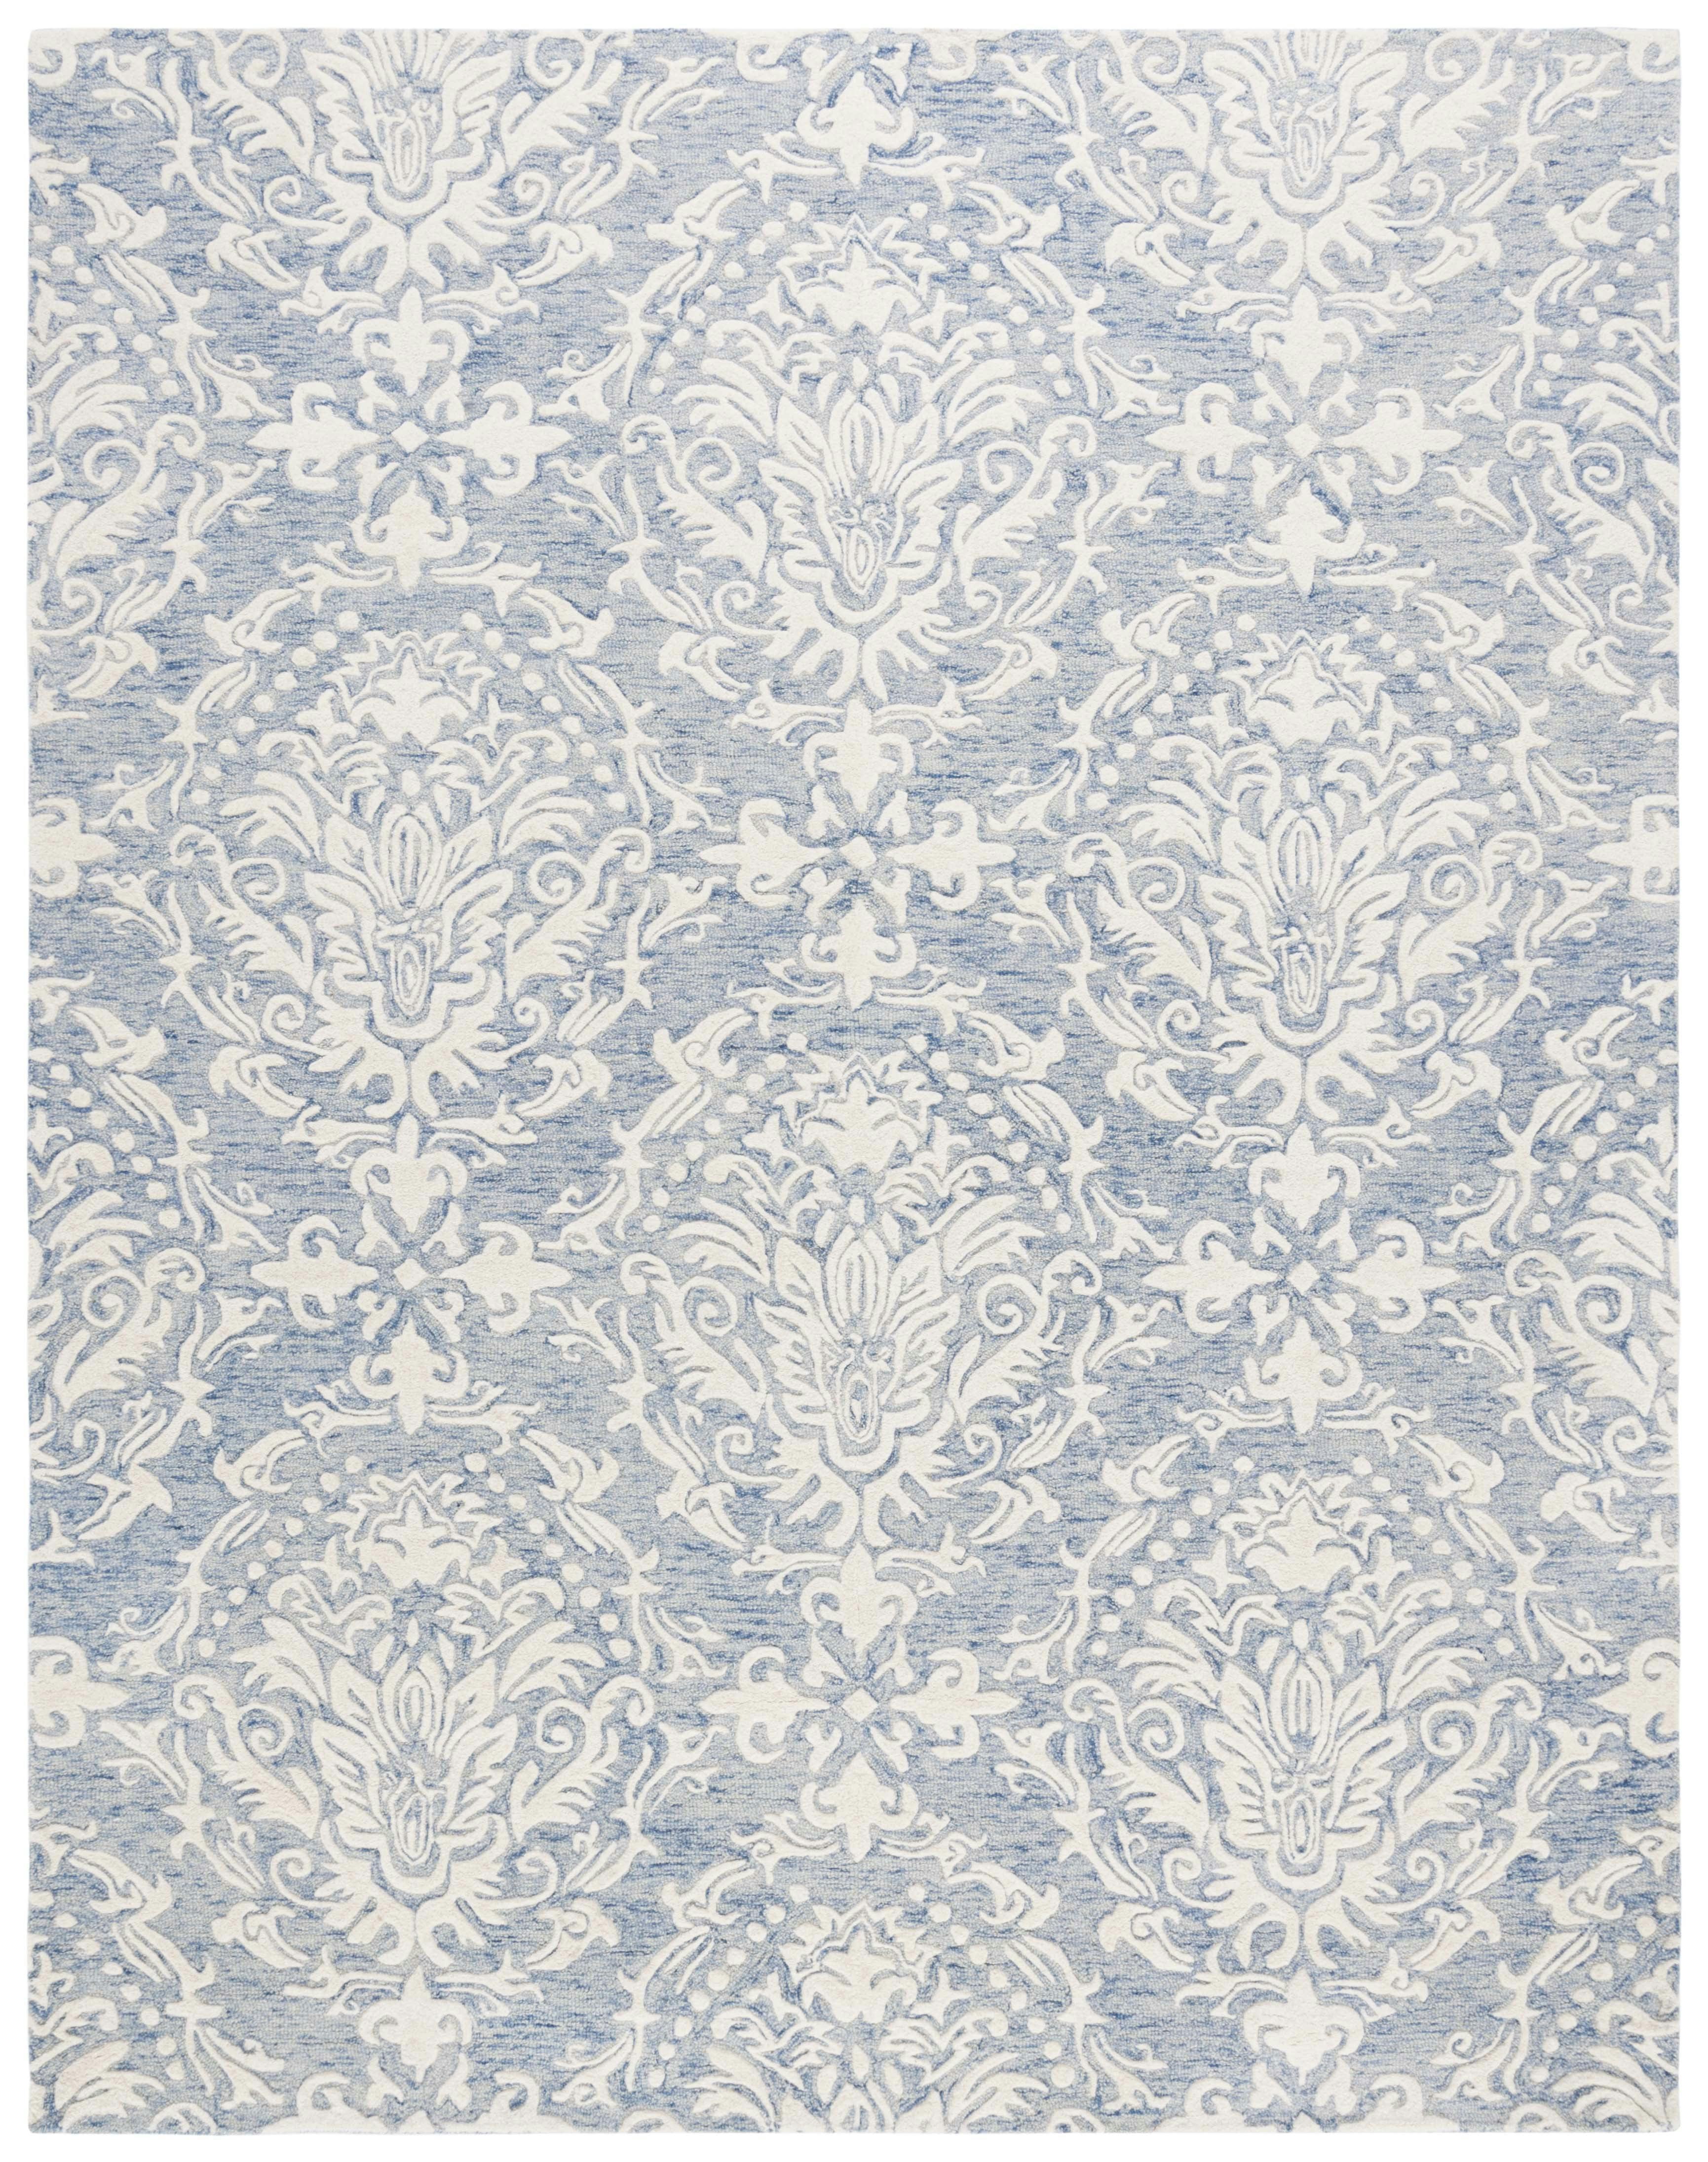 Hand-Tufted Blossom Blue/Ivory Wool Area Rug, 8' x 10'